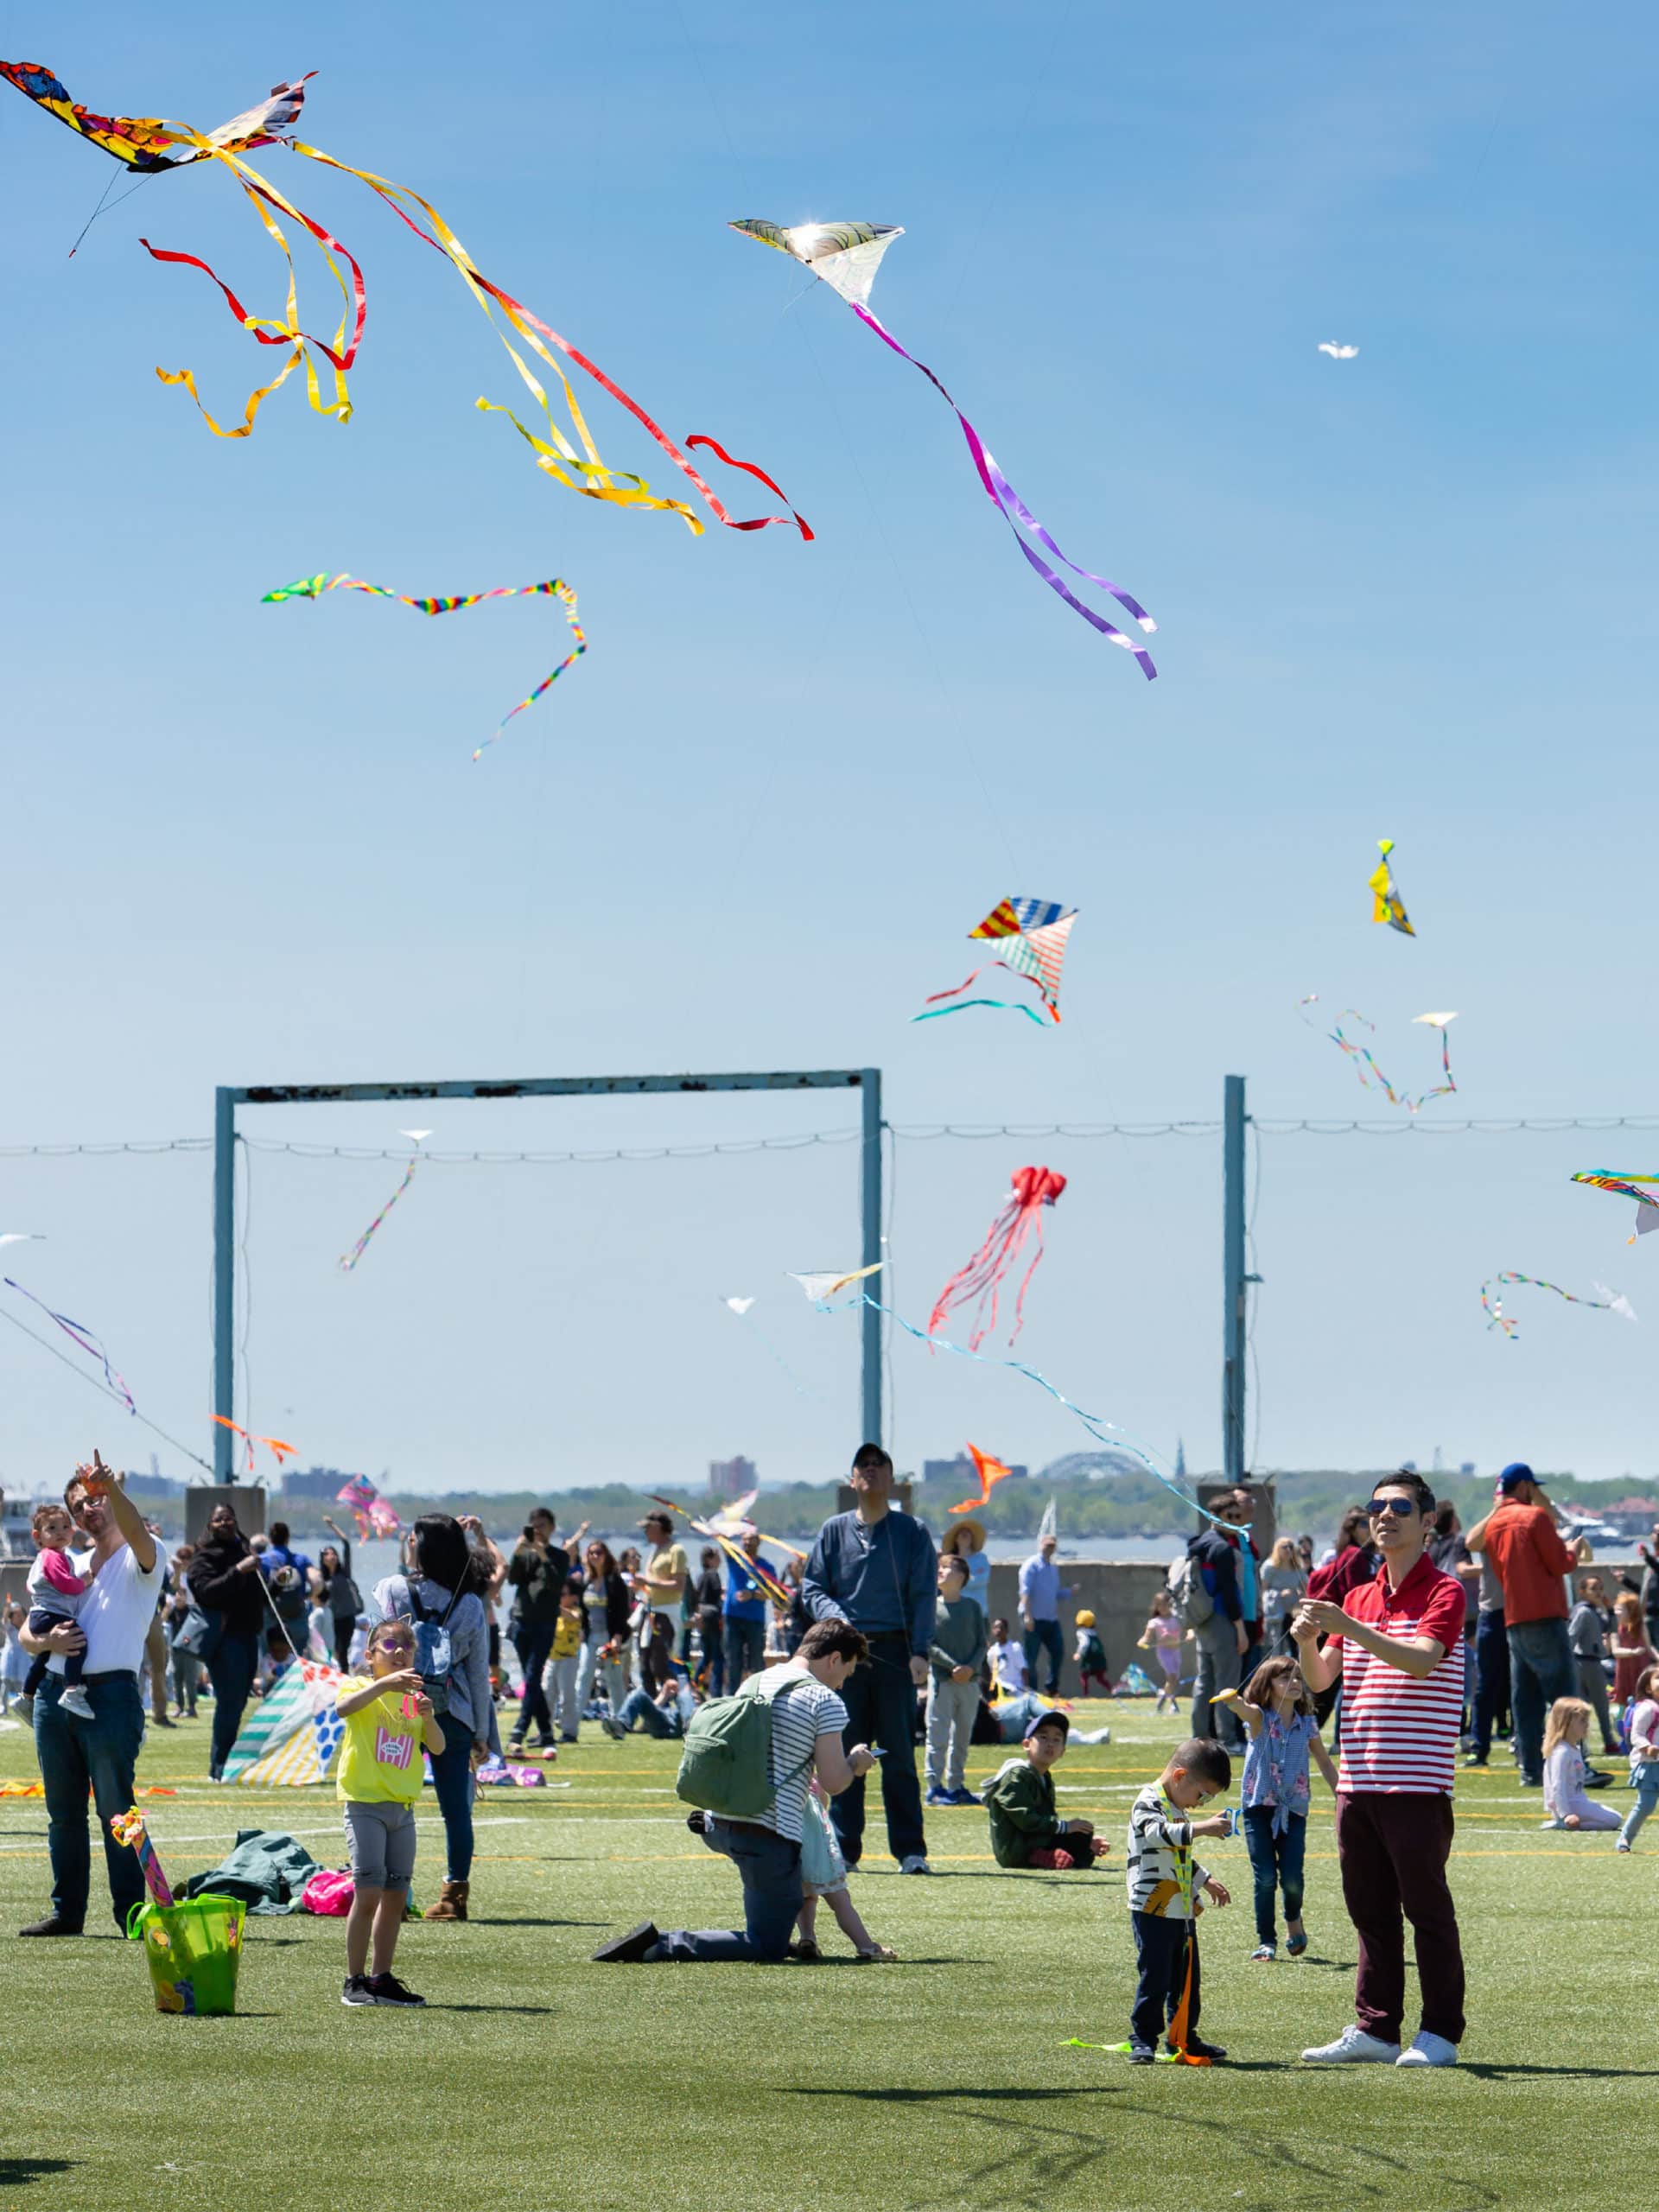 Crowd of people flying kites on a sunny day.